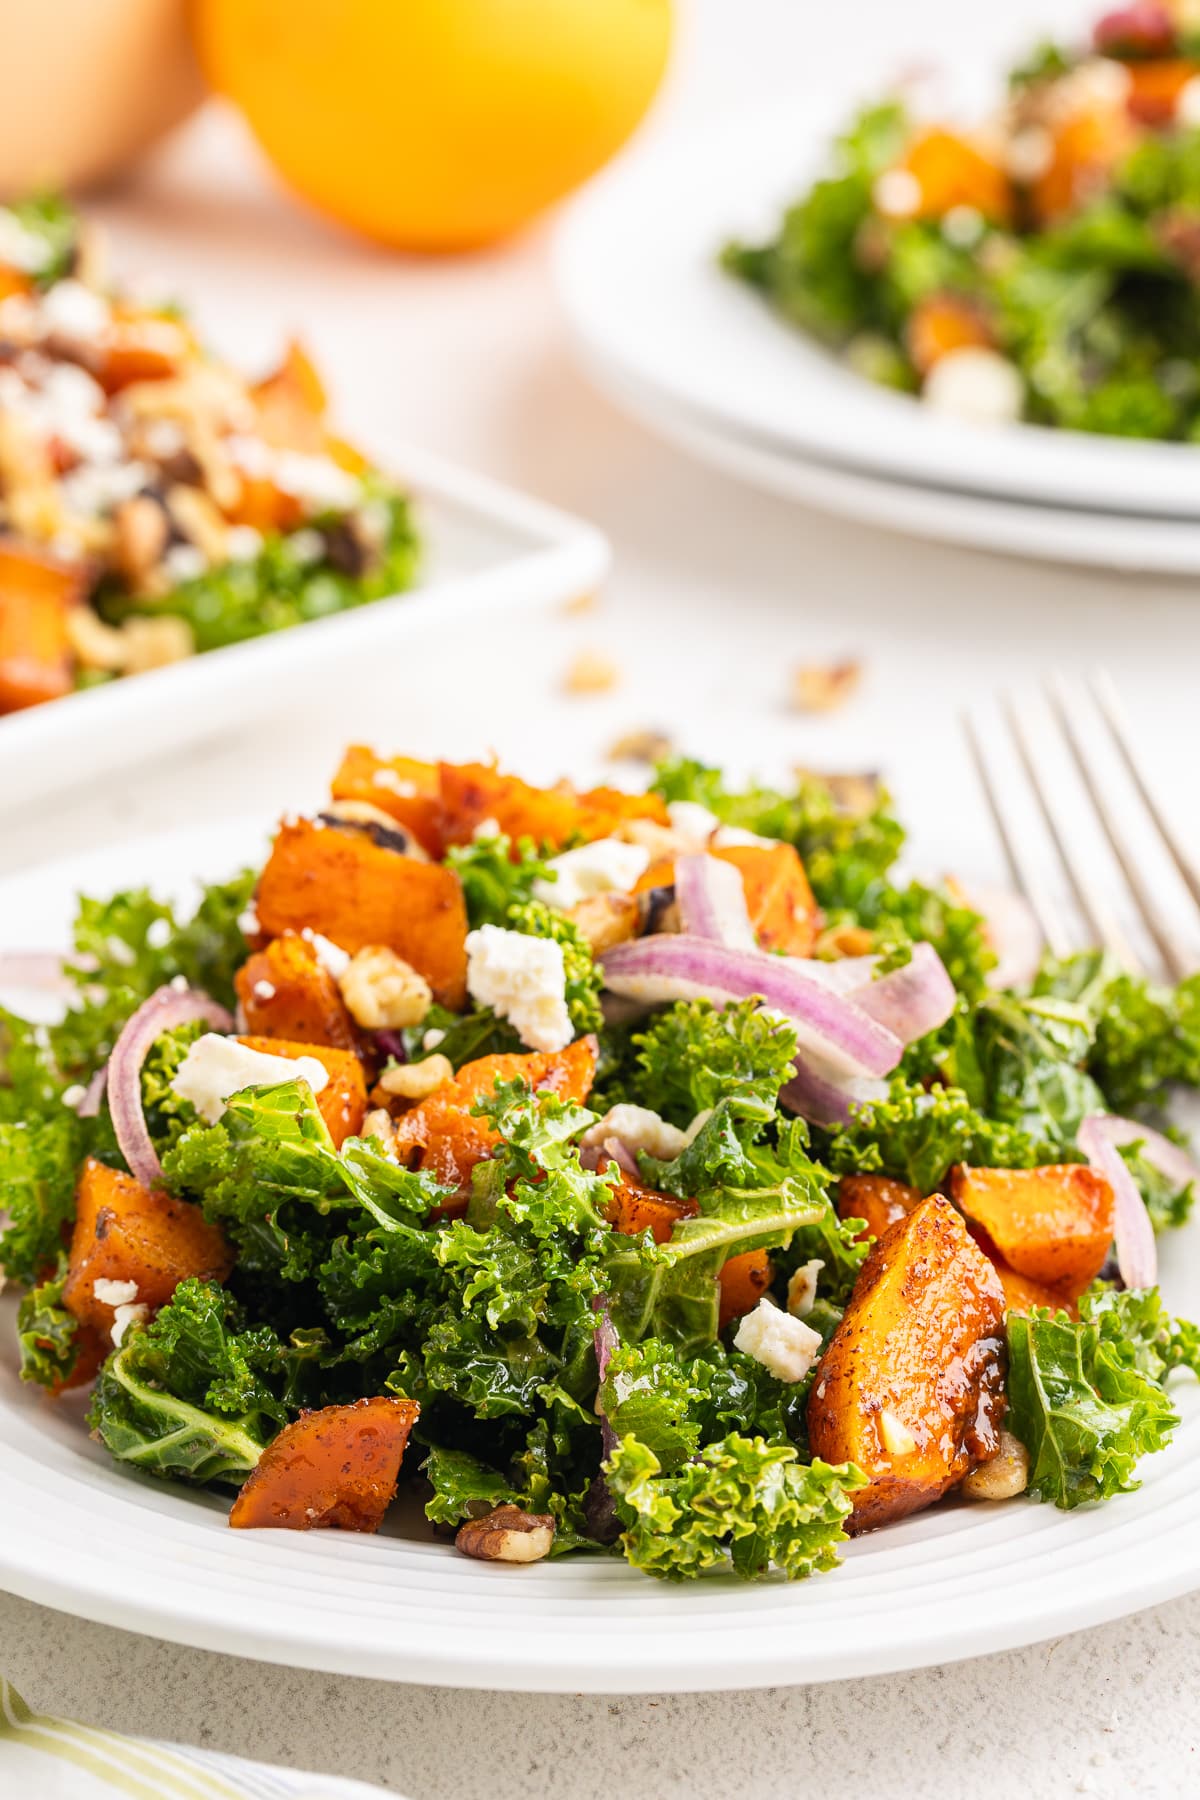 Roasted Butternut Squash and Kale Salad on a white plate with a serving tray with the remaining salad in the background.